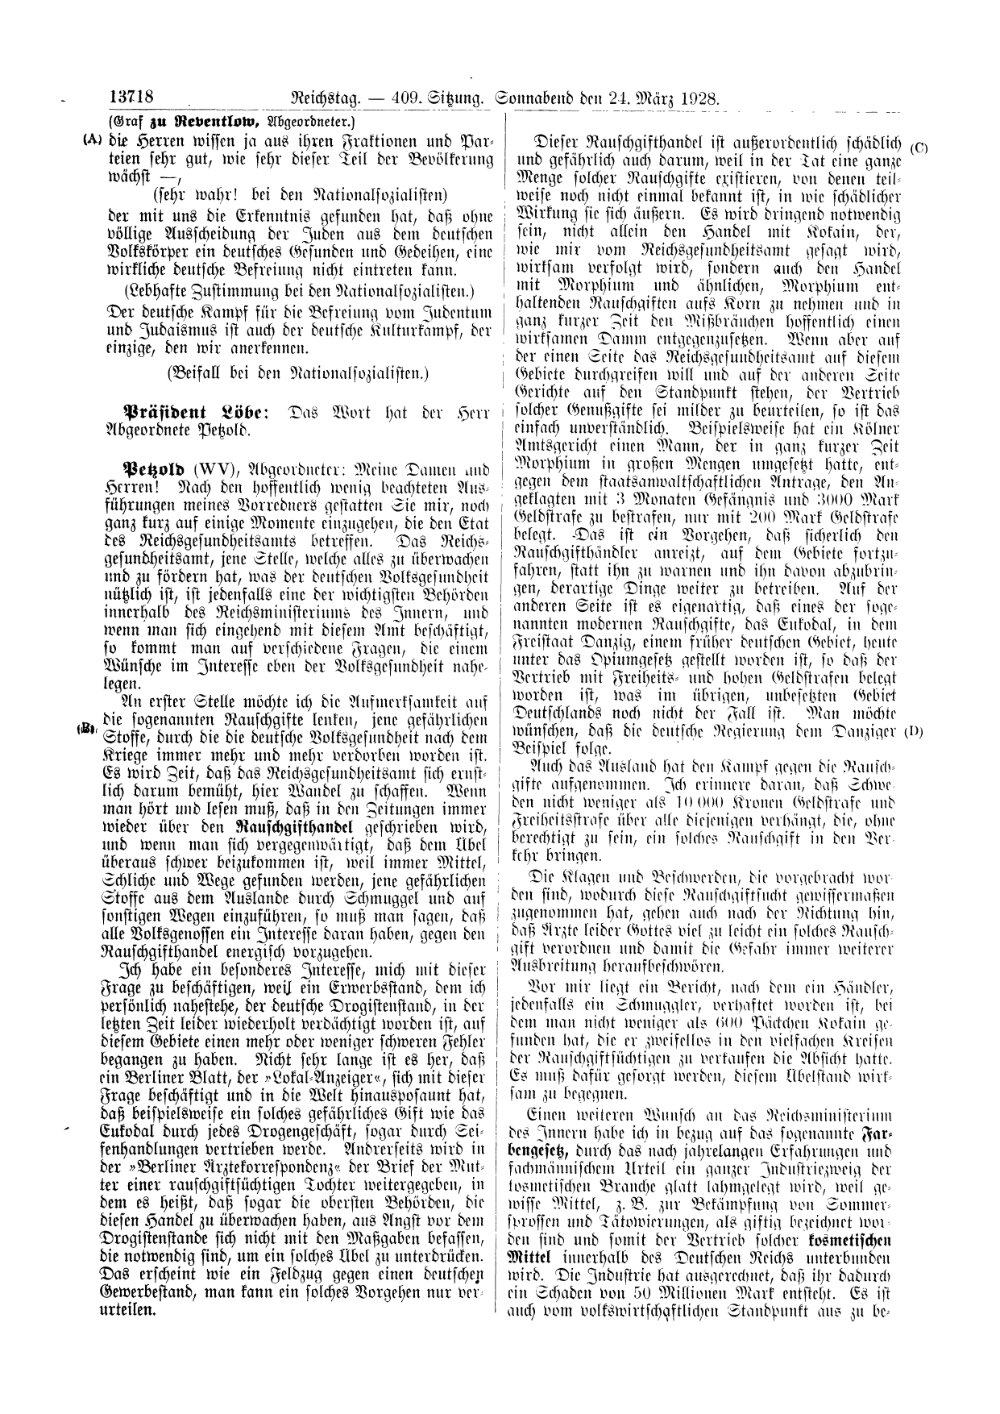 Scan of page 13718